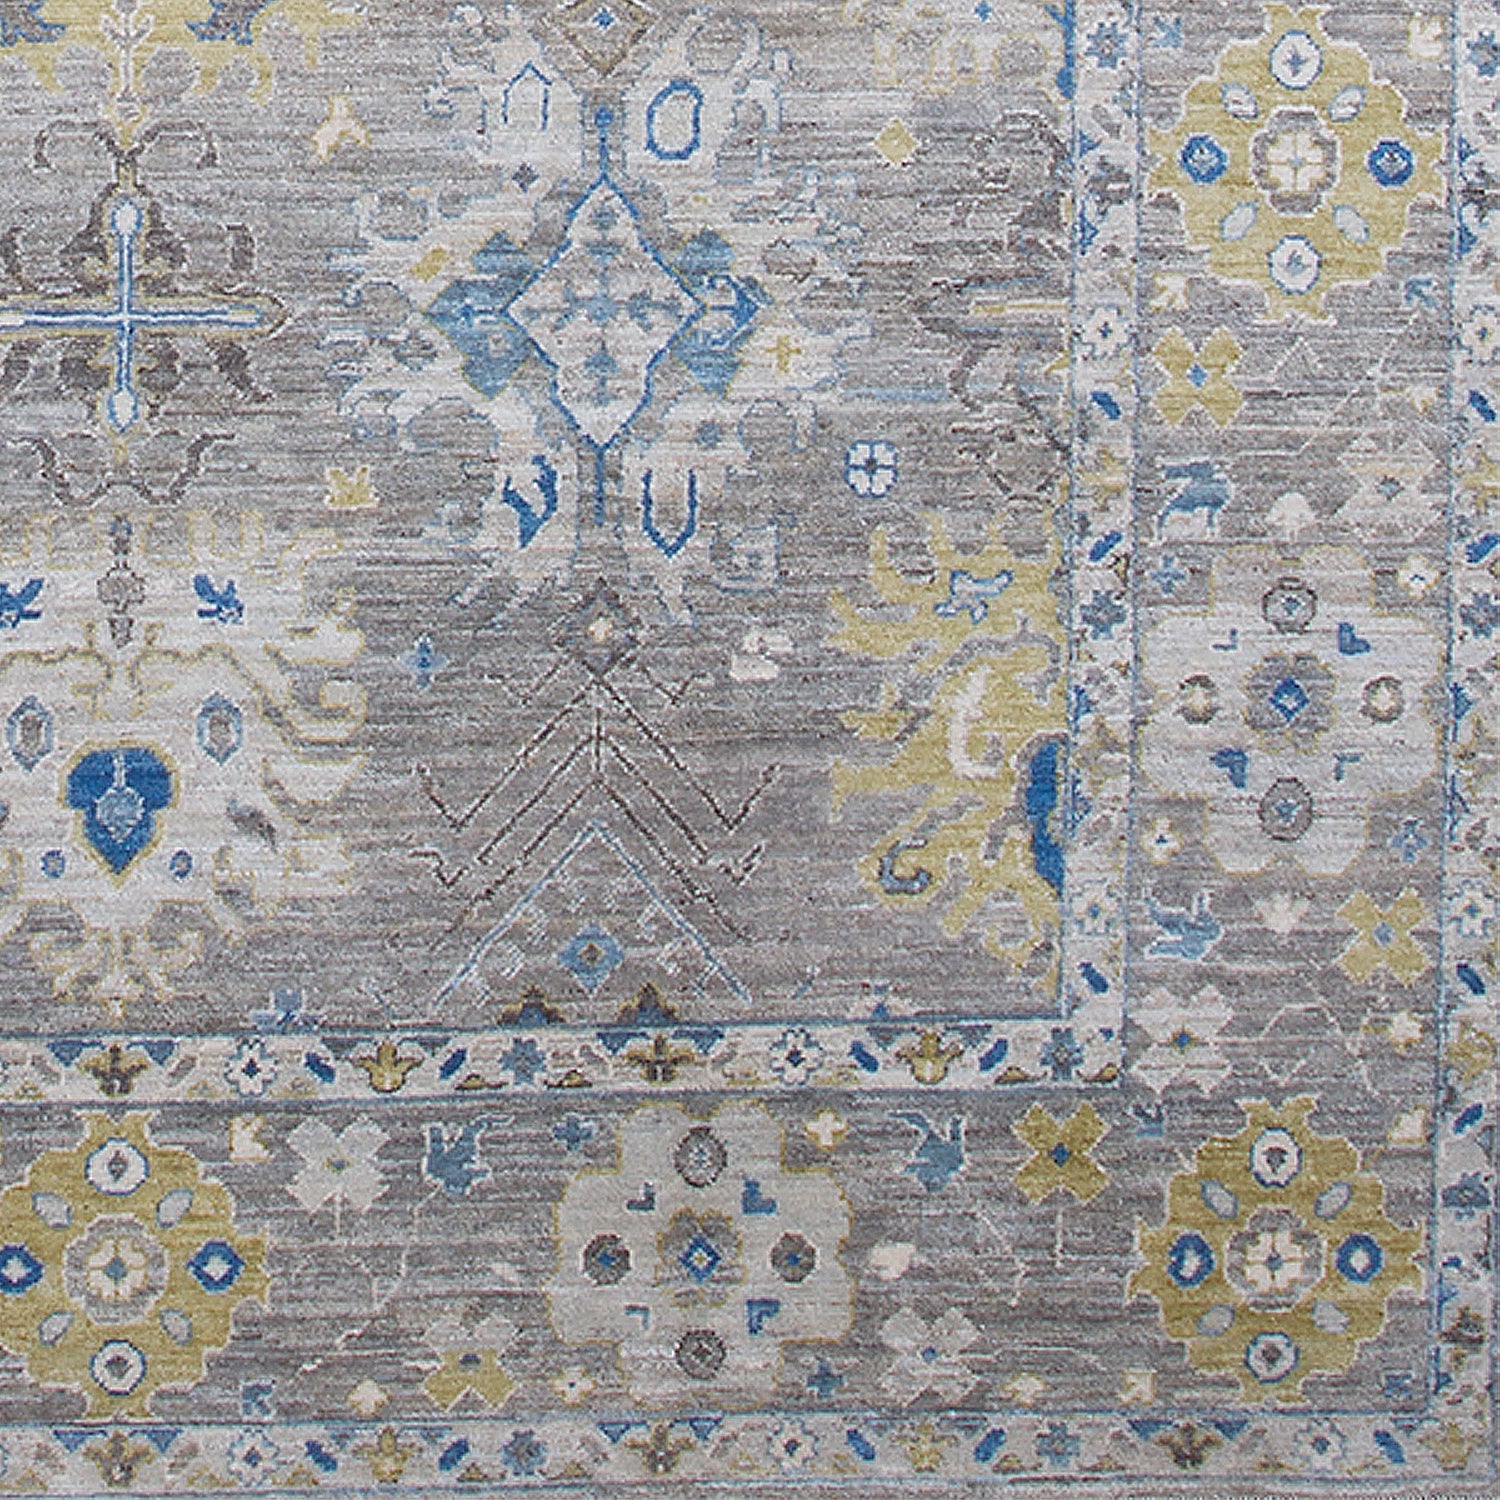 Detail of a woven rug in an abstract floral pattern with a repeating floral border print in shades of yellow, blue and gray on a mottled gray field.